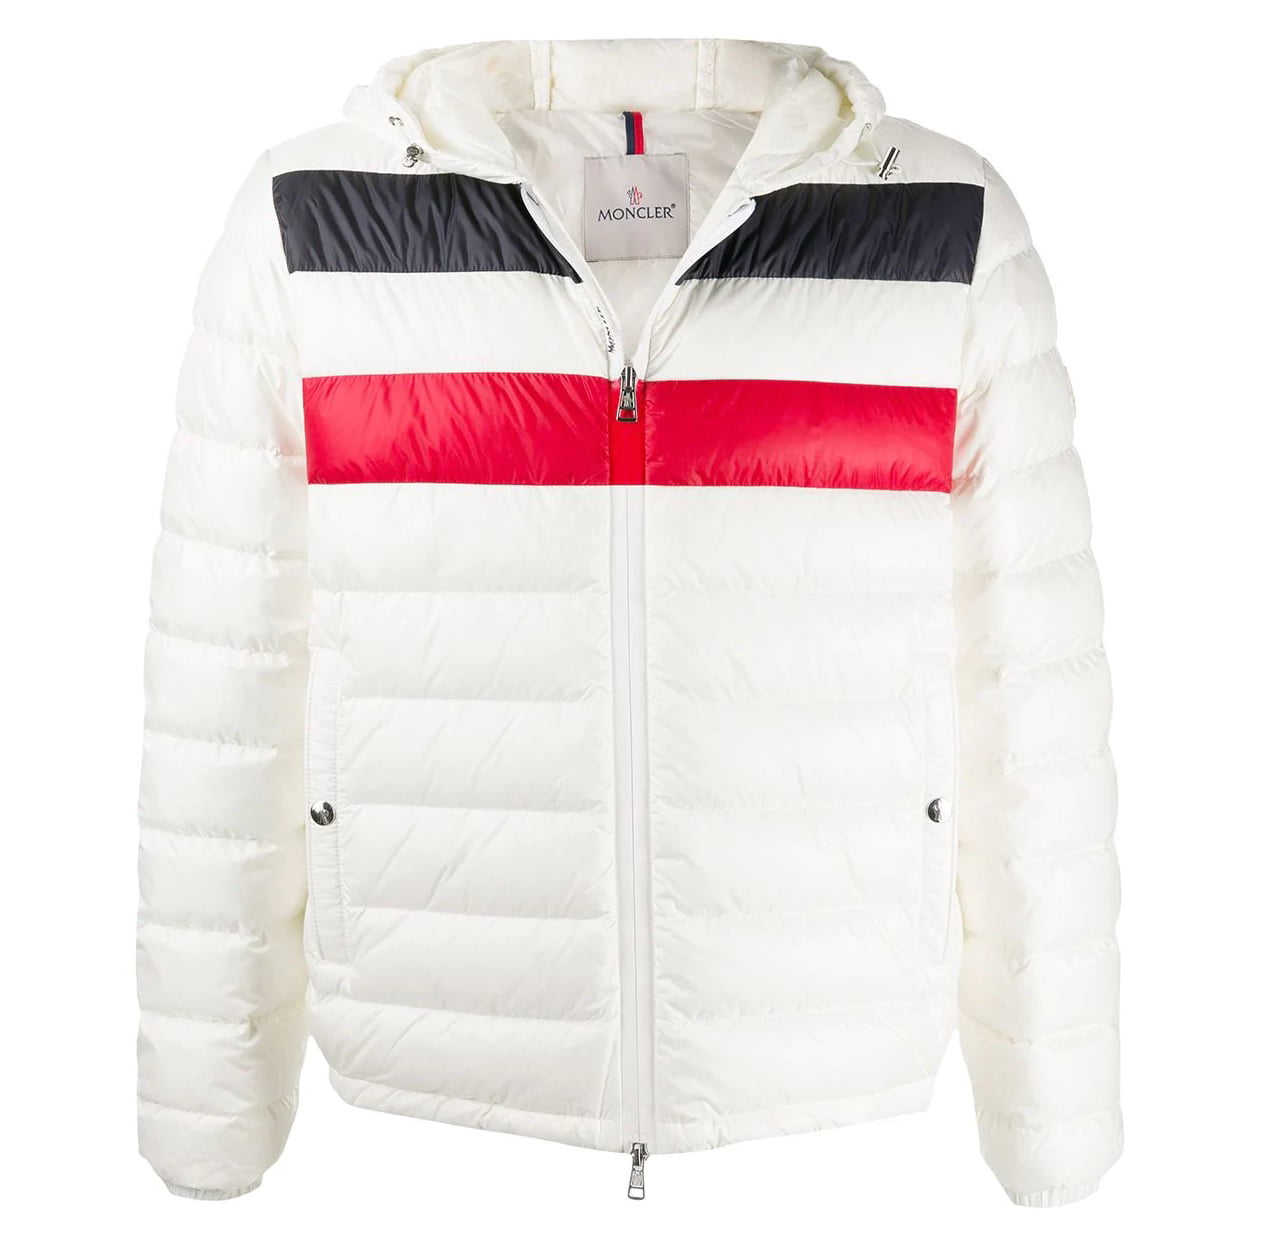 moncler jacket white mens,OFF 58%,www.concordehotels.com.tr